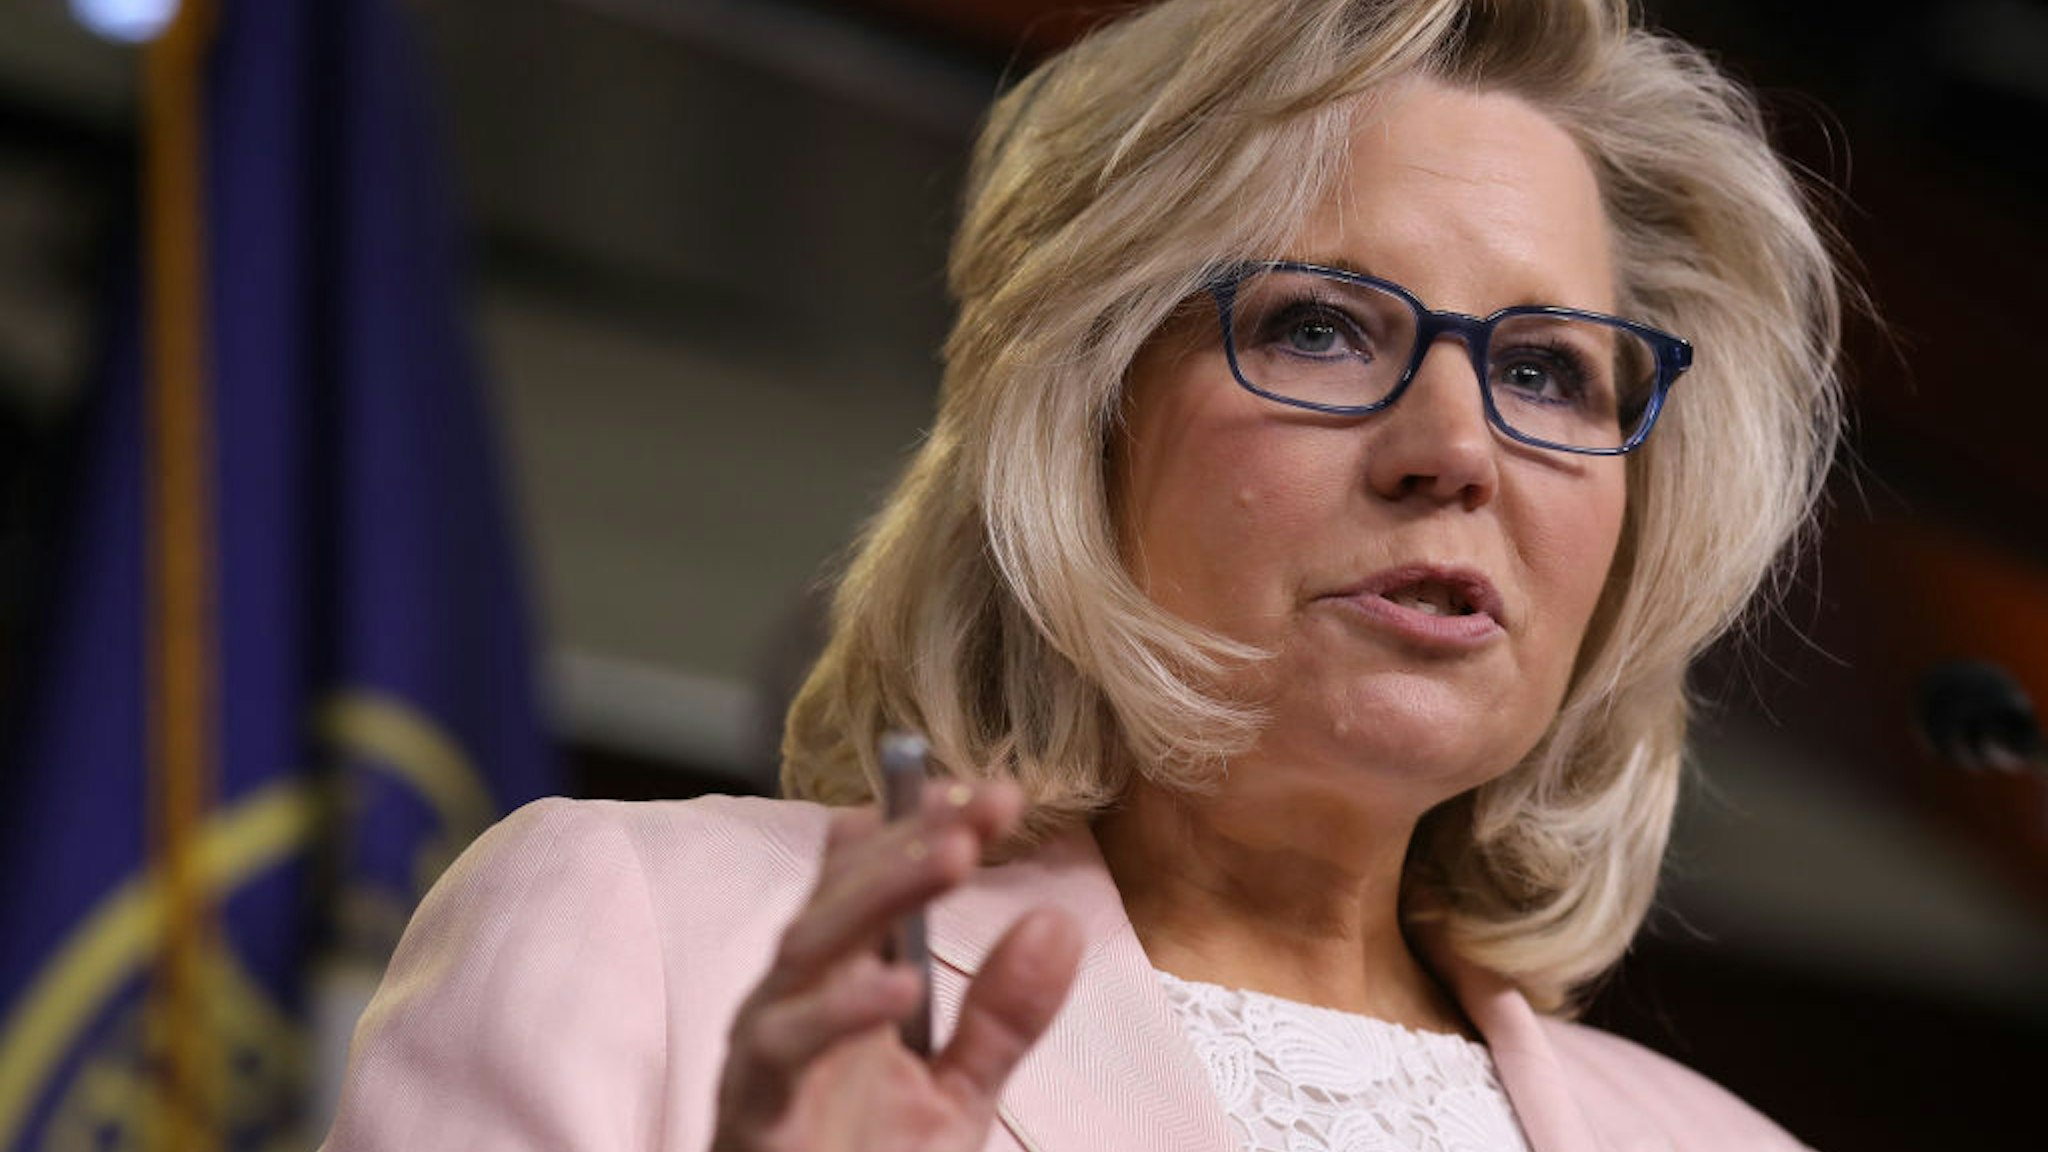 WASHINGTON, DC - MAY 08: House Republican Conference Chair Liz Cheney (R-WY) answers questions during a press conference at the U.S. Capitol on May 08, 2019 in Washington, DC. Cheney commented extensively on efforts by House Democrats to find U.S. Attorney General William Barr in contempt of Congress.